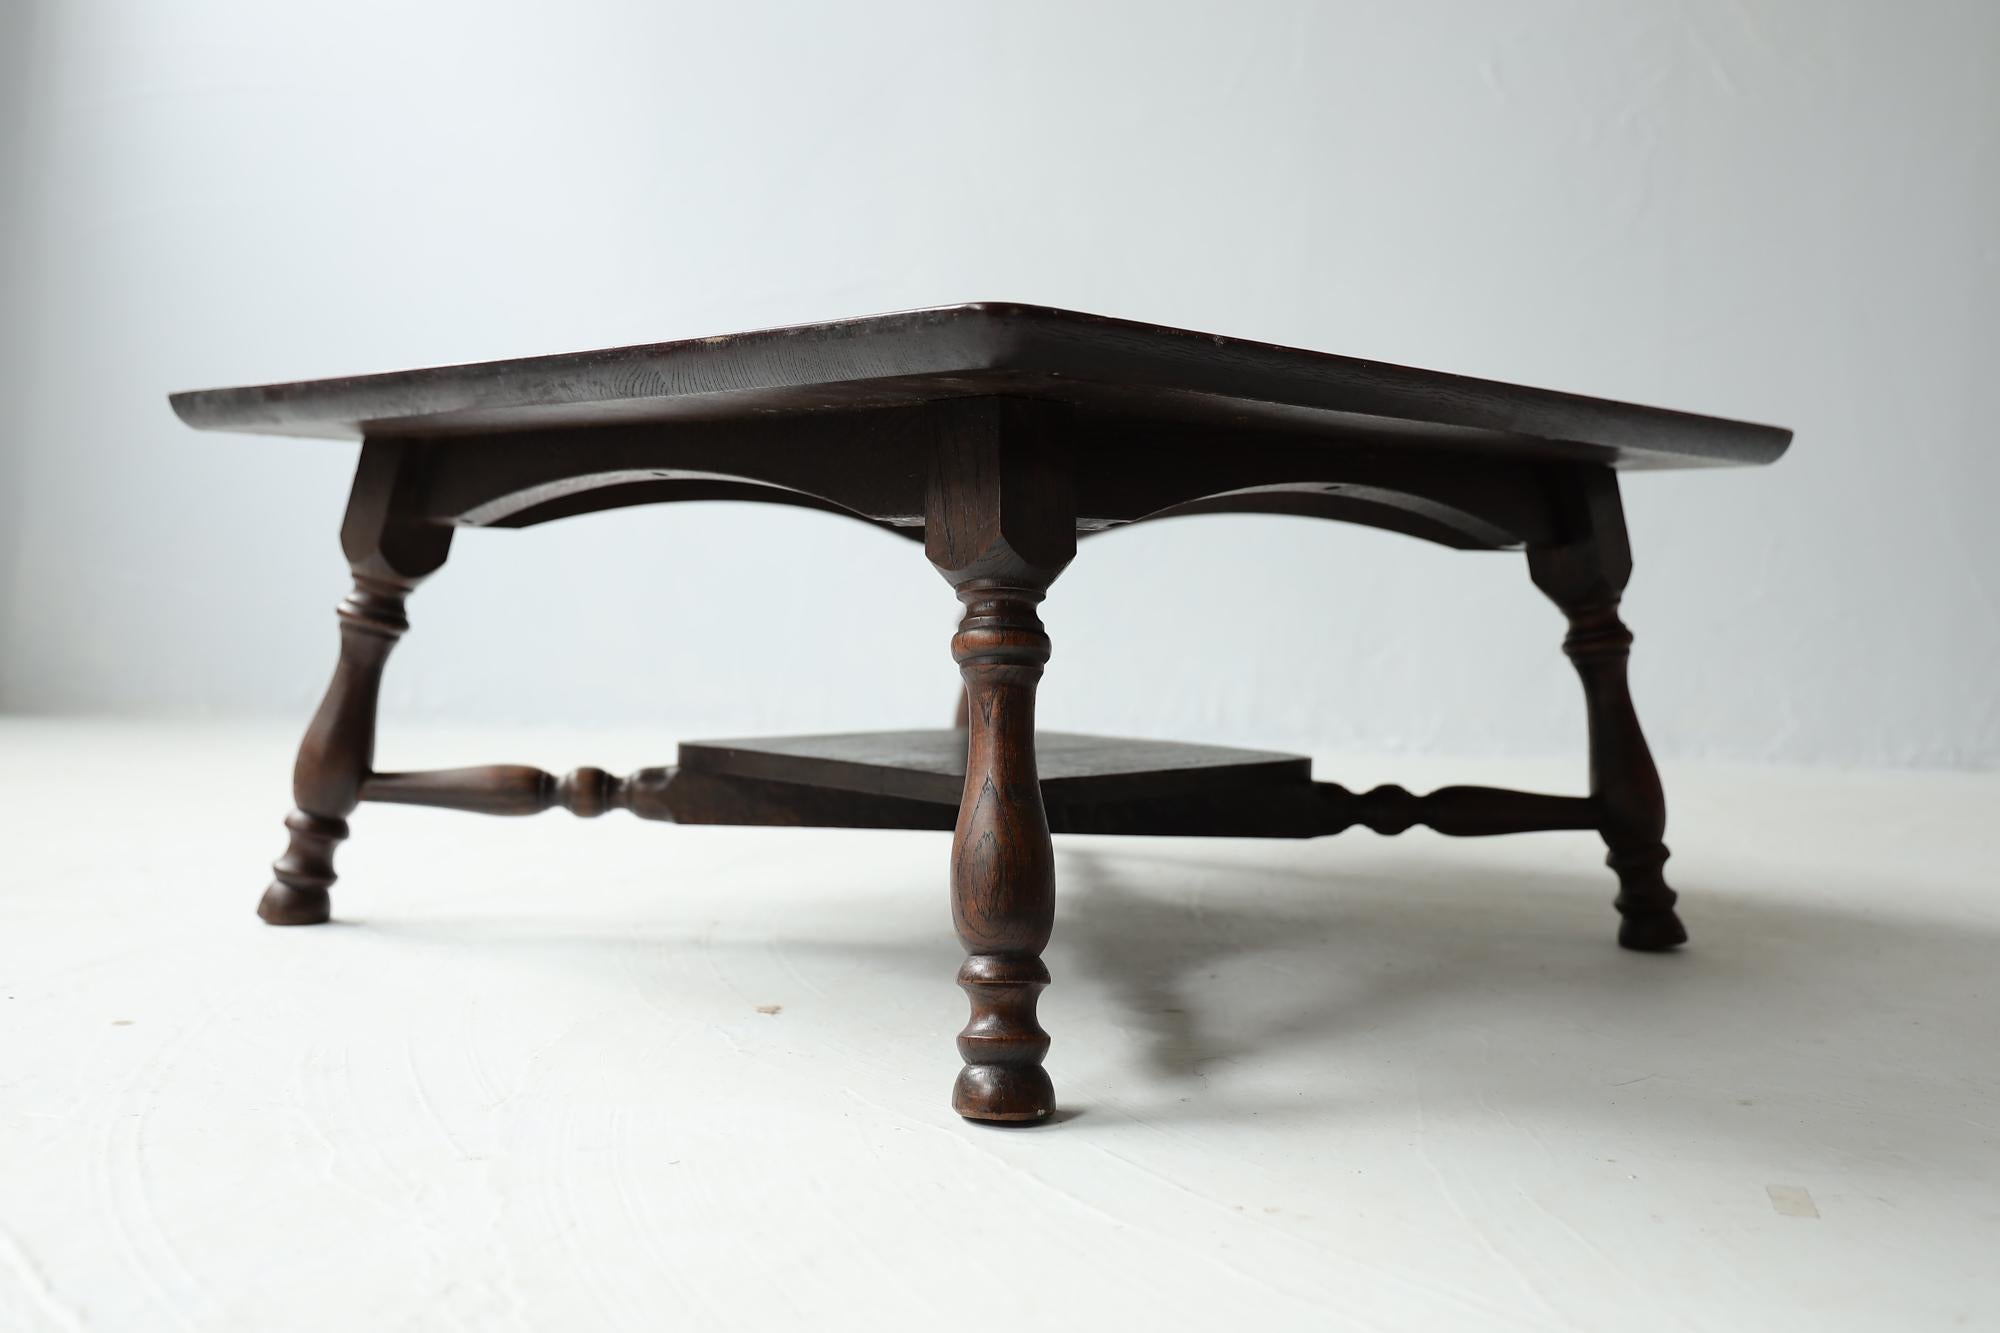 Hand-Crafted Japanese Antique Coffee Table, Wabi-Sabi, Early 20th Century For Sale